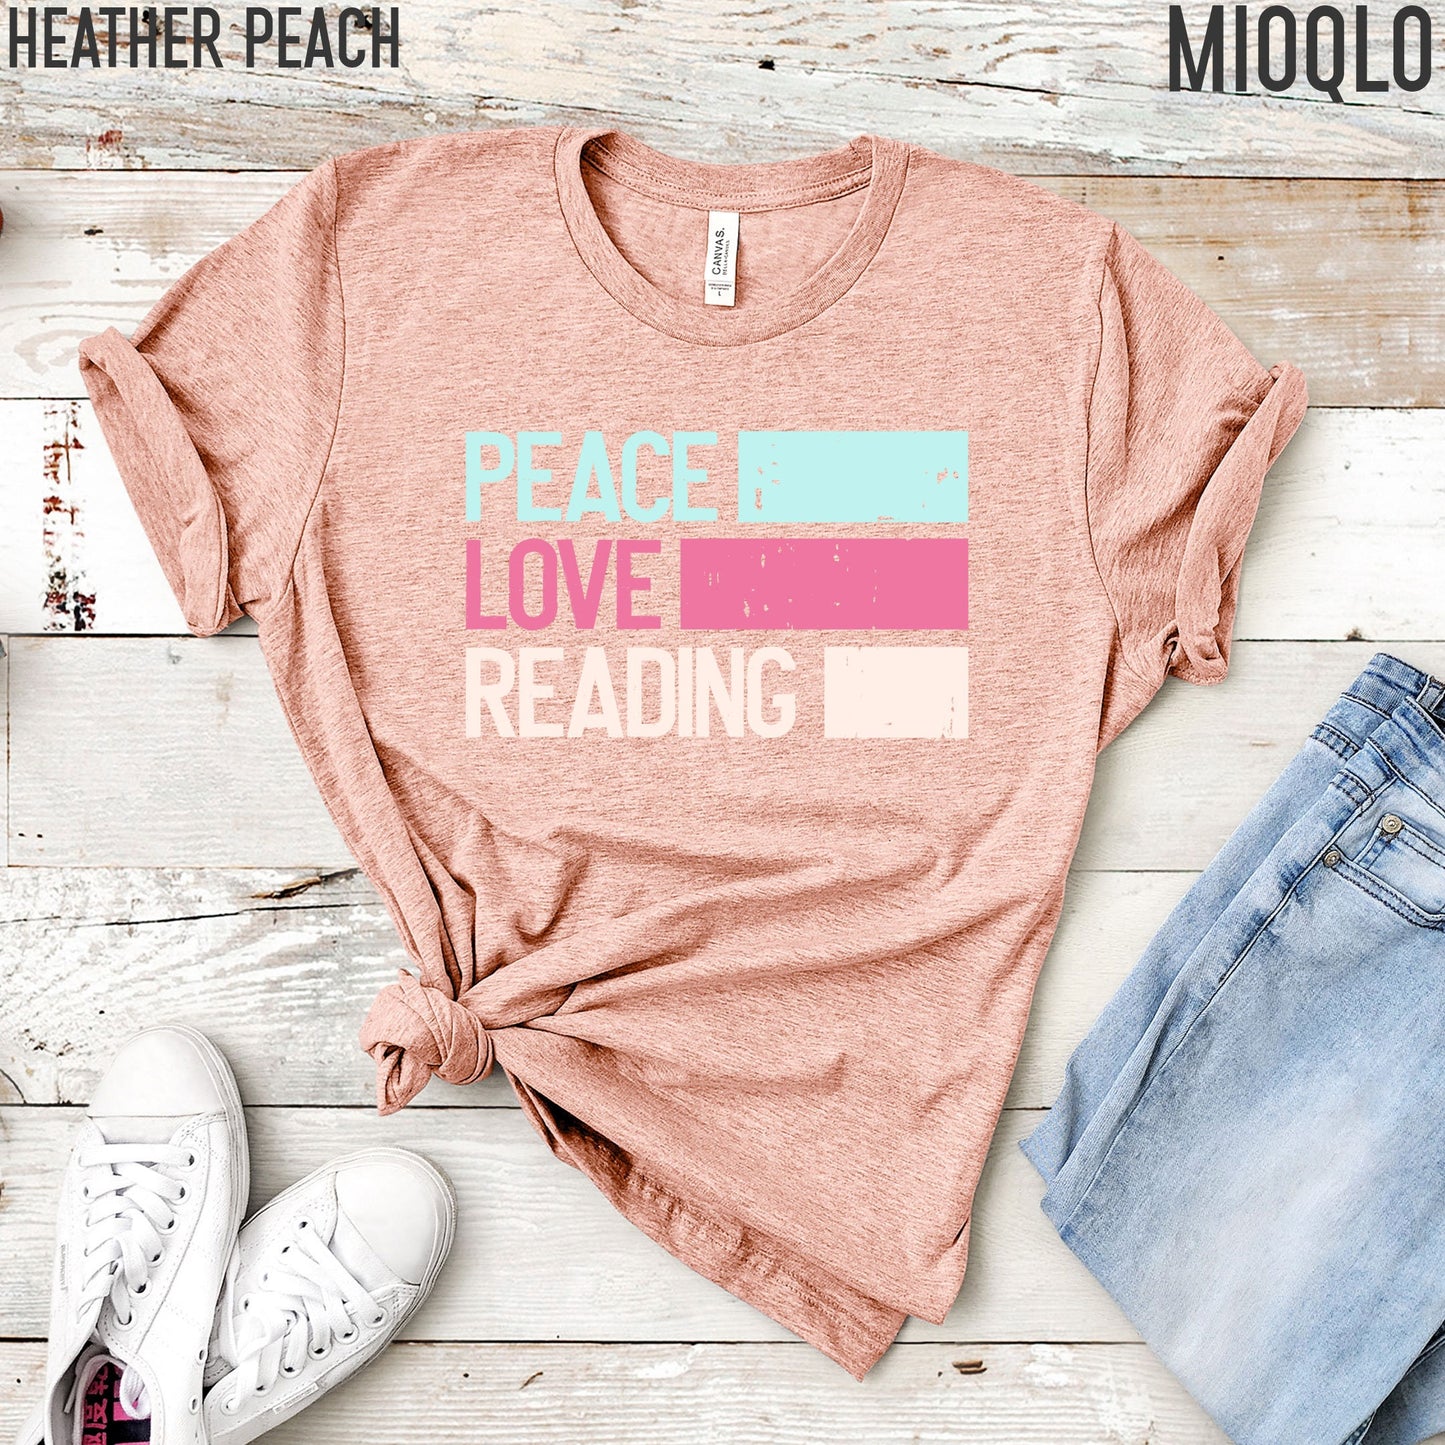 Peace Love Reading Shirt, Unisex Comfy Tee, Book Lover Tank, Librarian Top, Rainbow Pastel Color Tank Top, School Librarian Chapter Book Tee